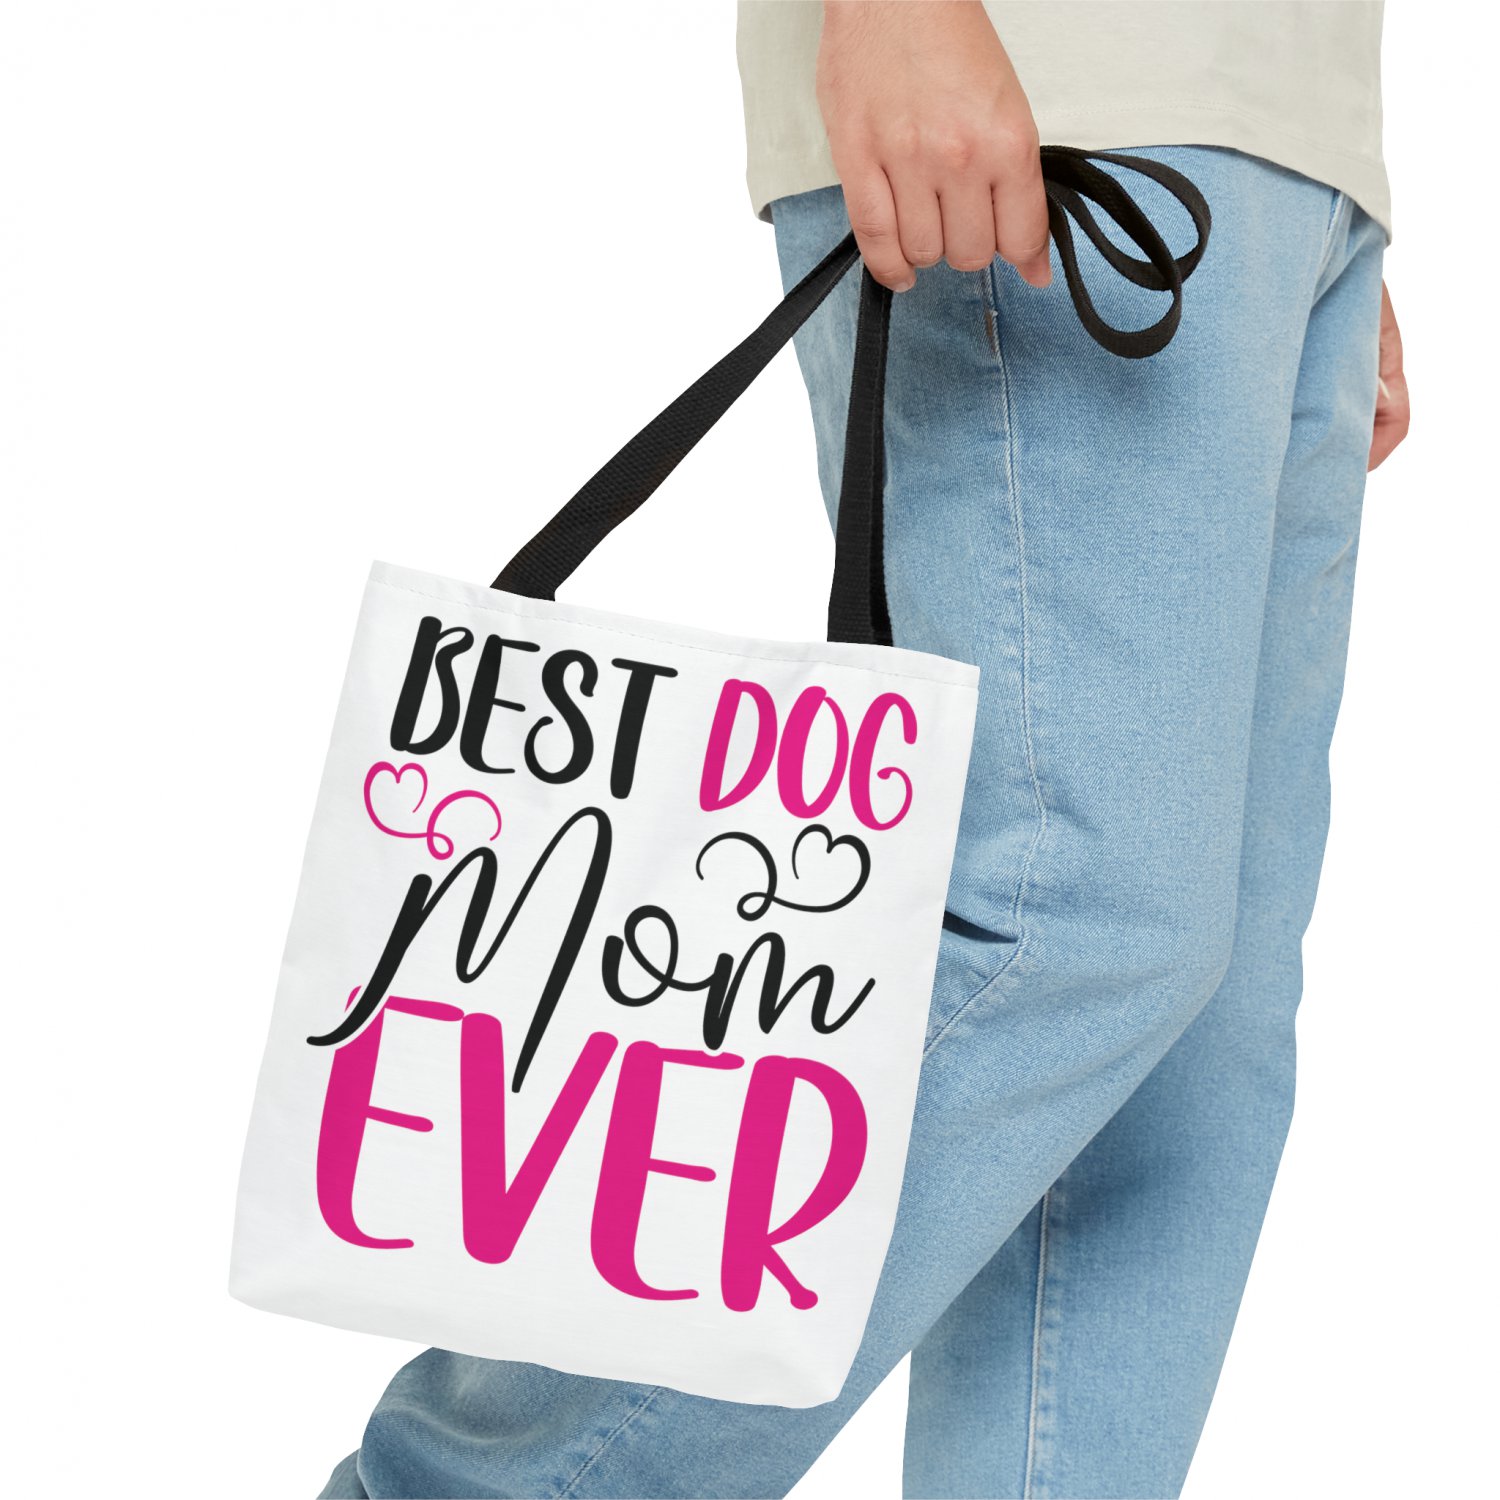 Best Dog Mom Ever Tote Bag Small